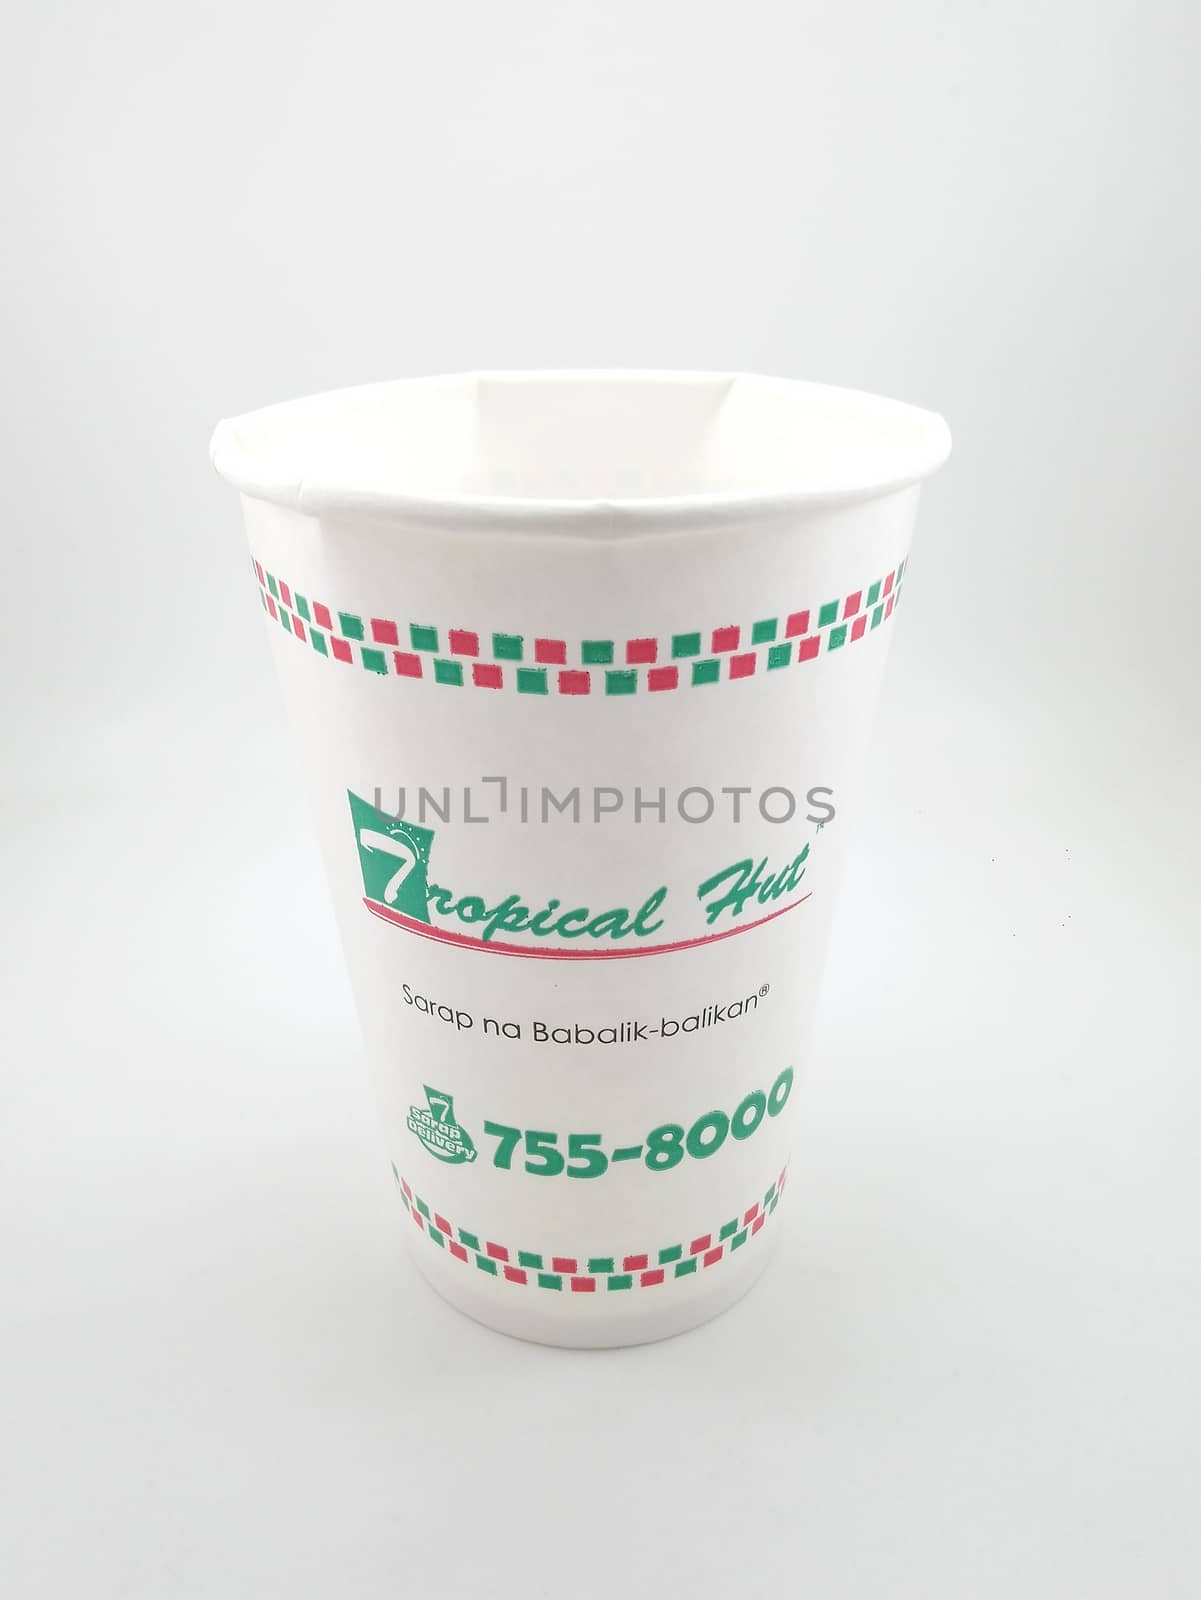 Tropical hut drinking cup in Manila, Philippines by imwaltersy